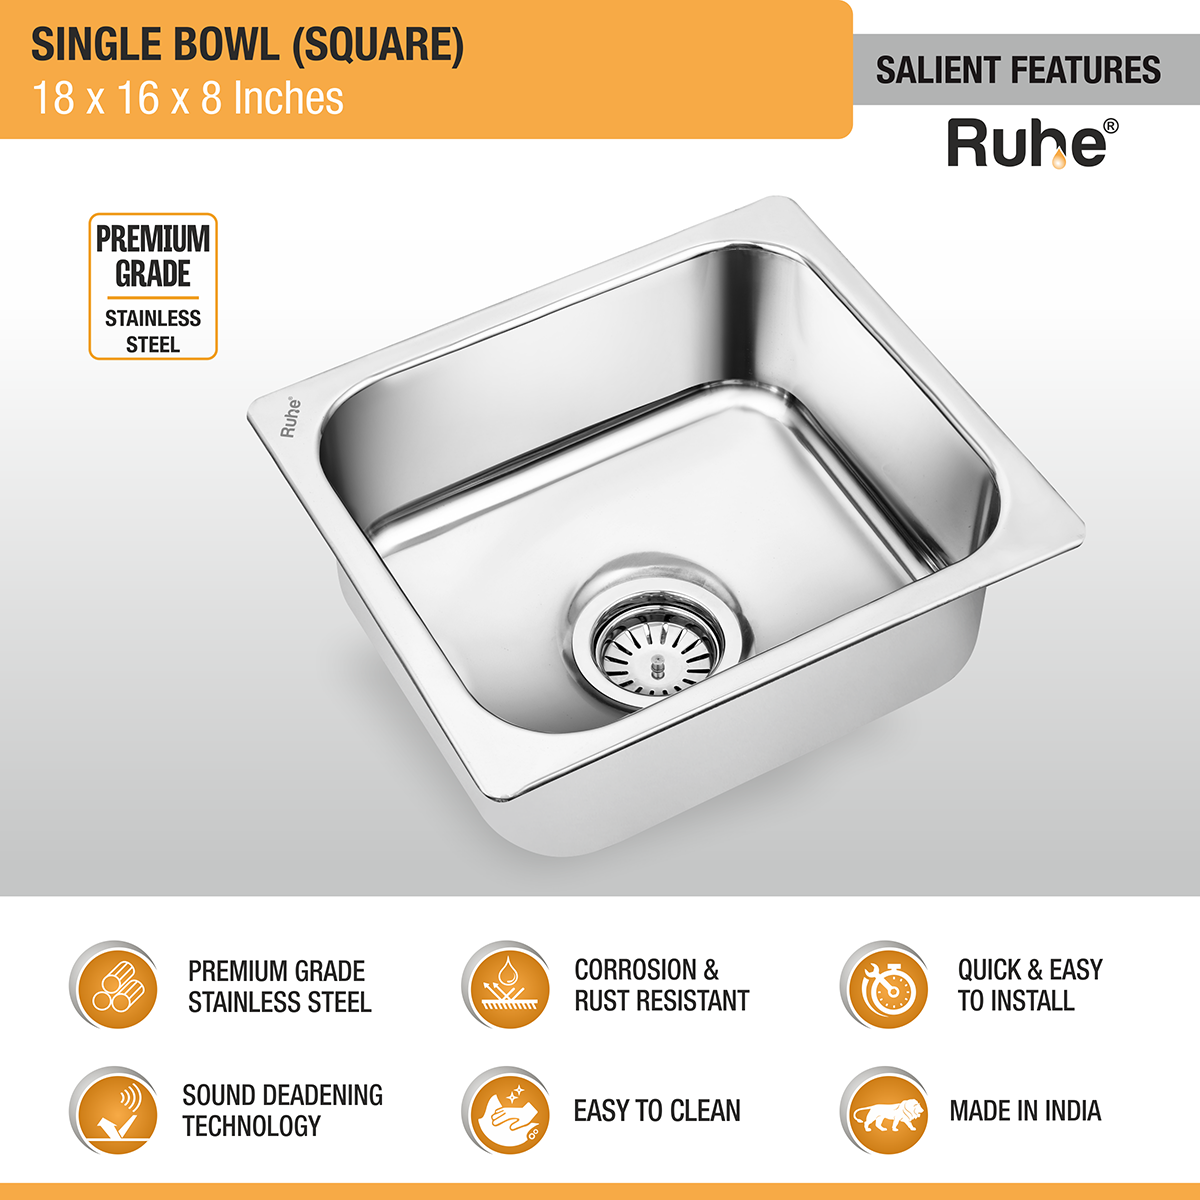 Square Single Bowl Kitchen Sink (18 x 16 x 8 inches) features and benefits